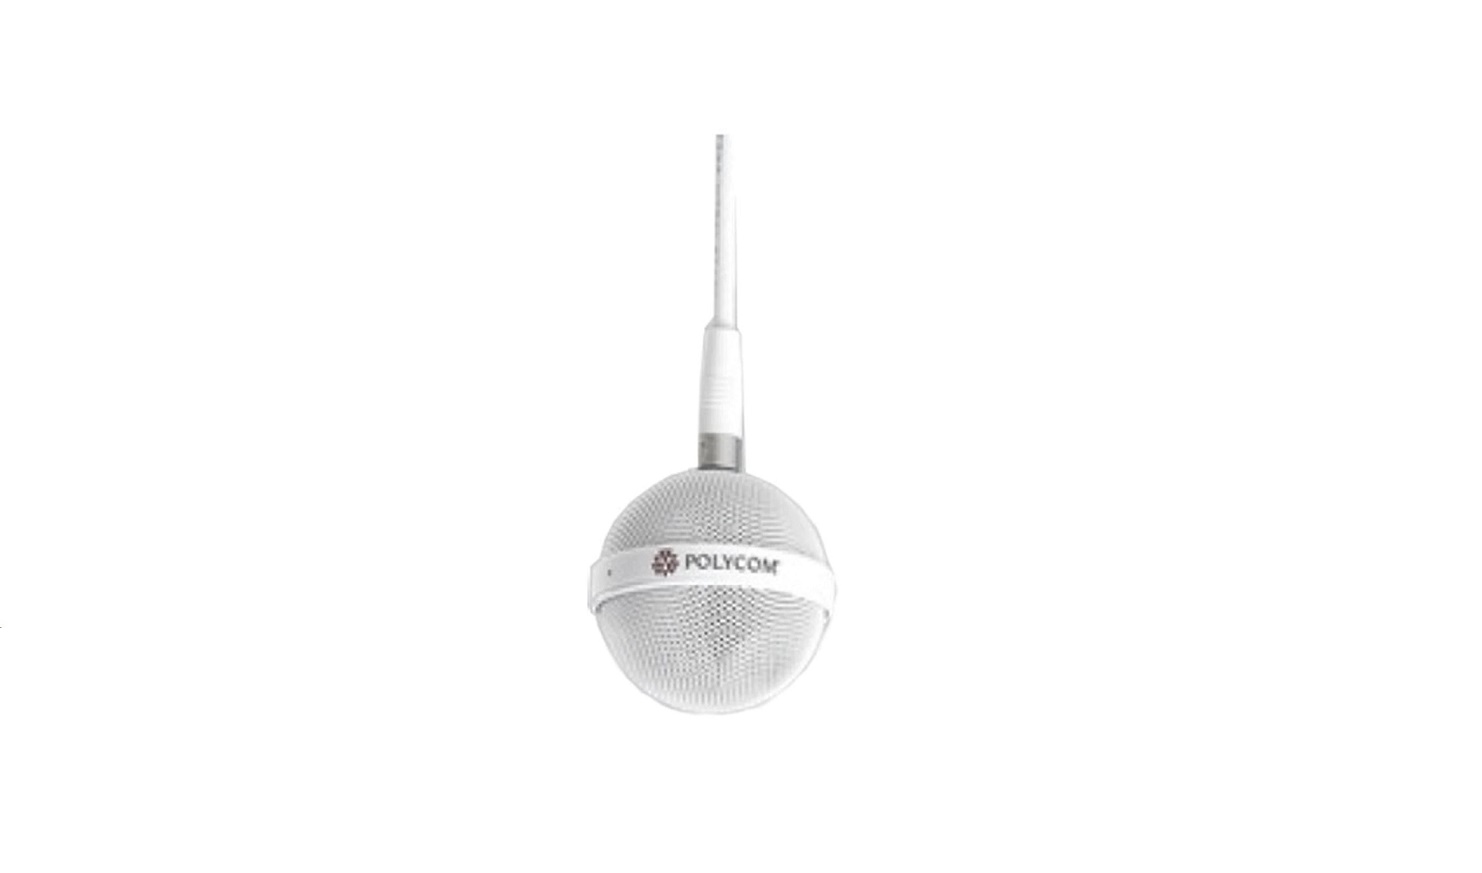 Polycom Extended Length White Drop Cable For Spherical Ceiling Microphon 2457-26765-072